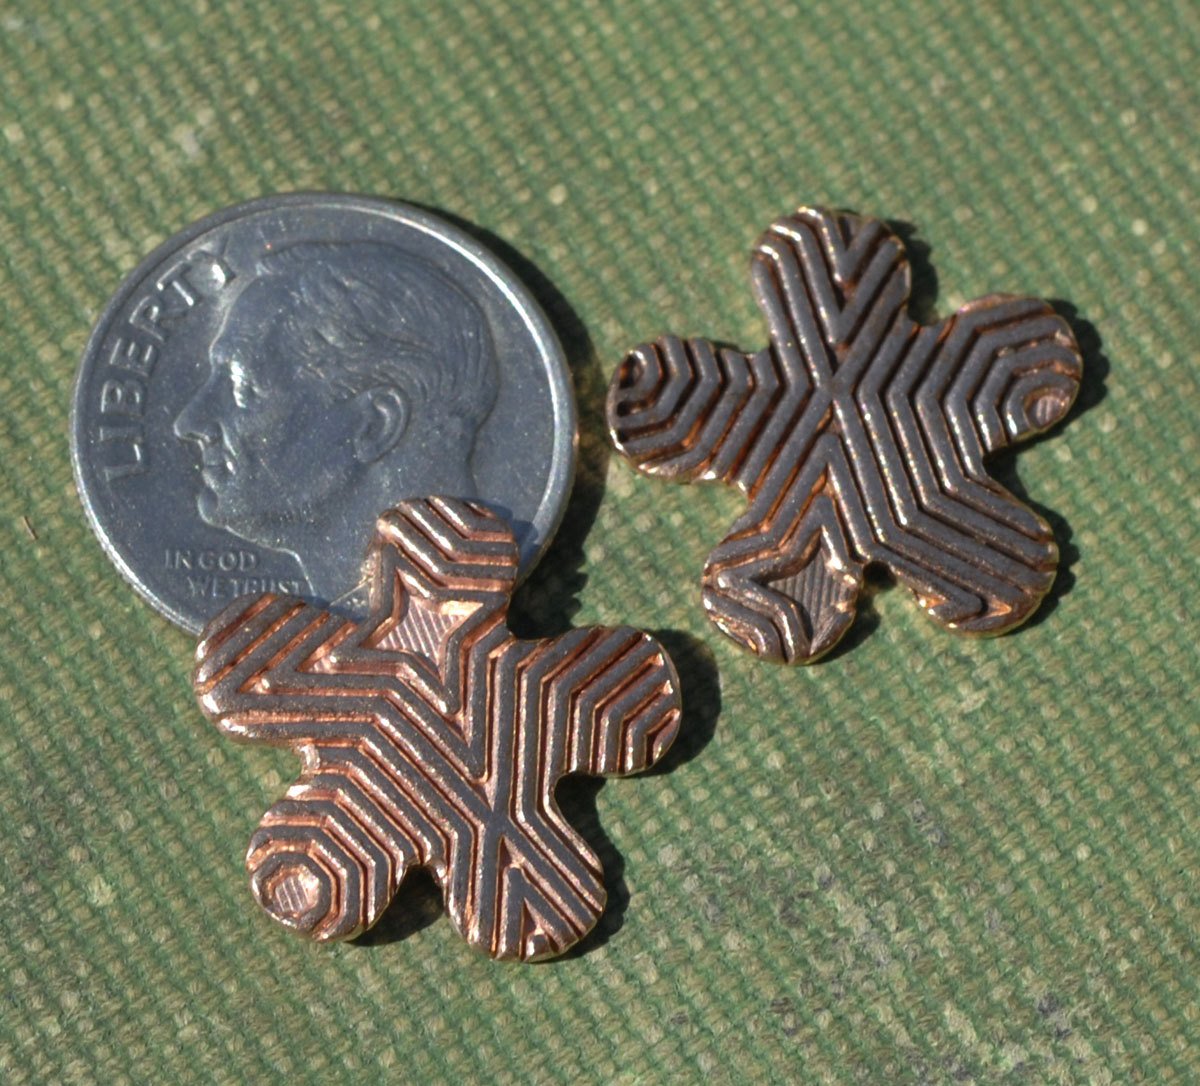 Flower 17mm in Hexagon Pattern for Blanks Enameling Stamping Texturing - Variety of Metals